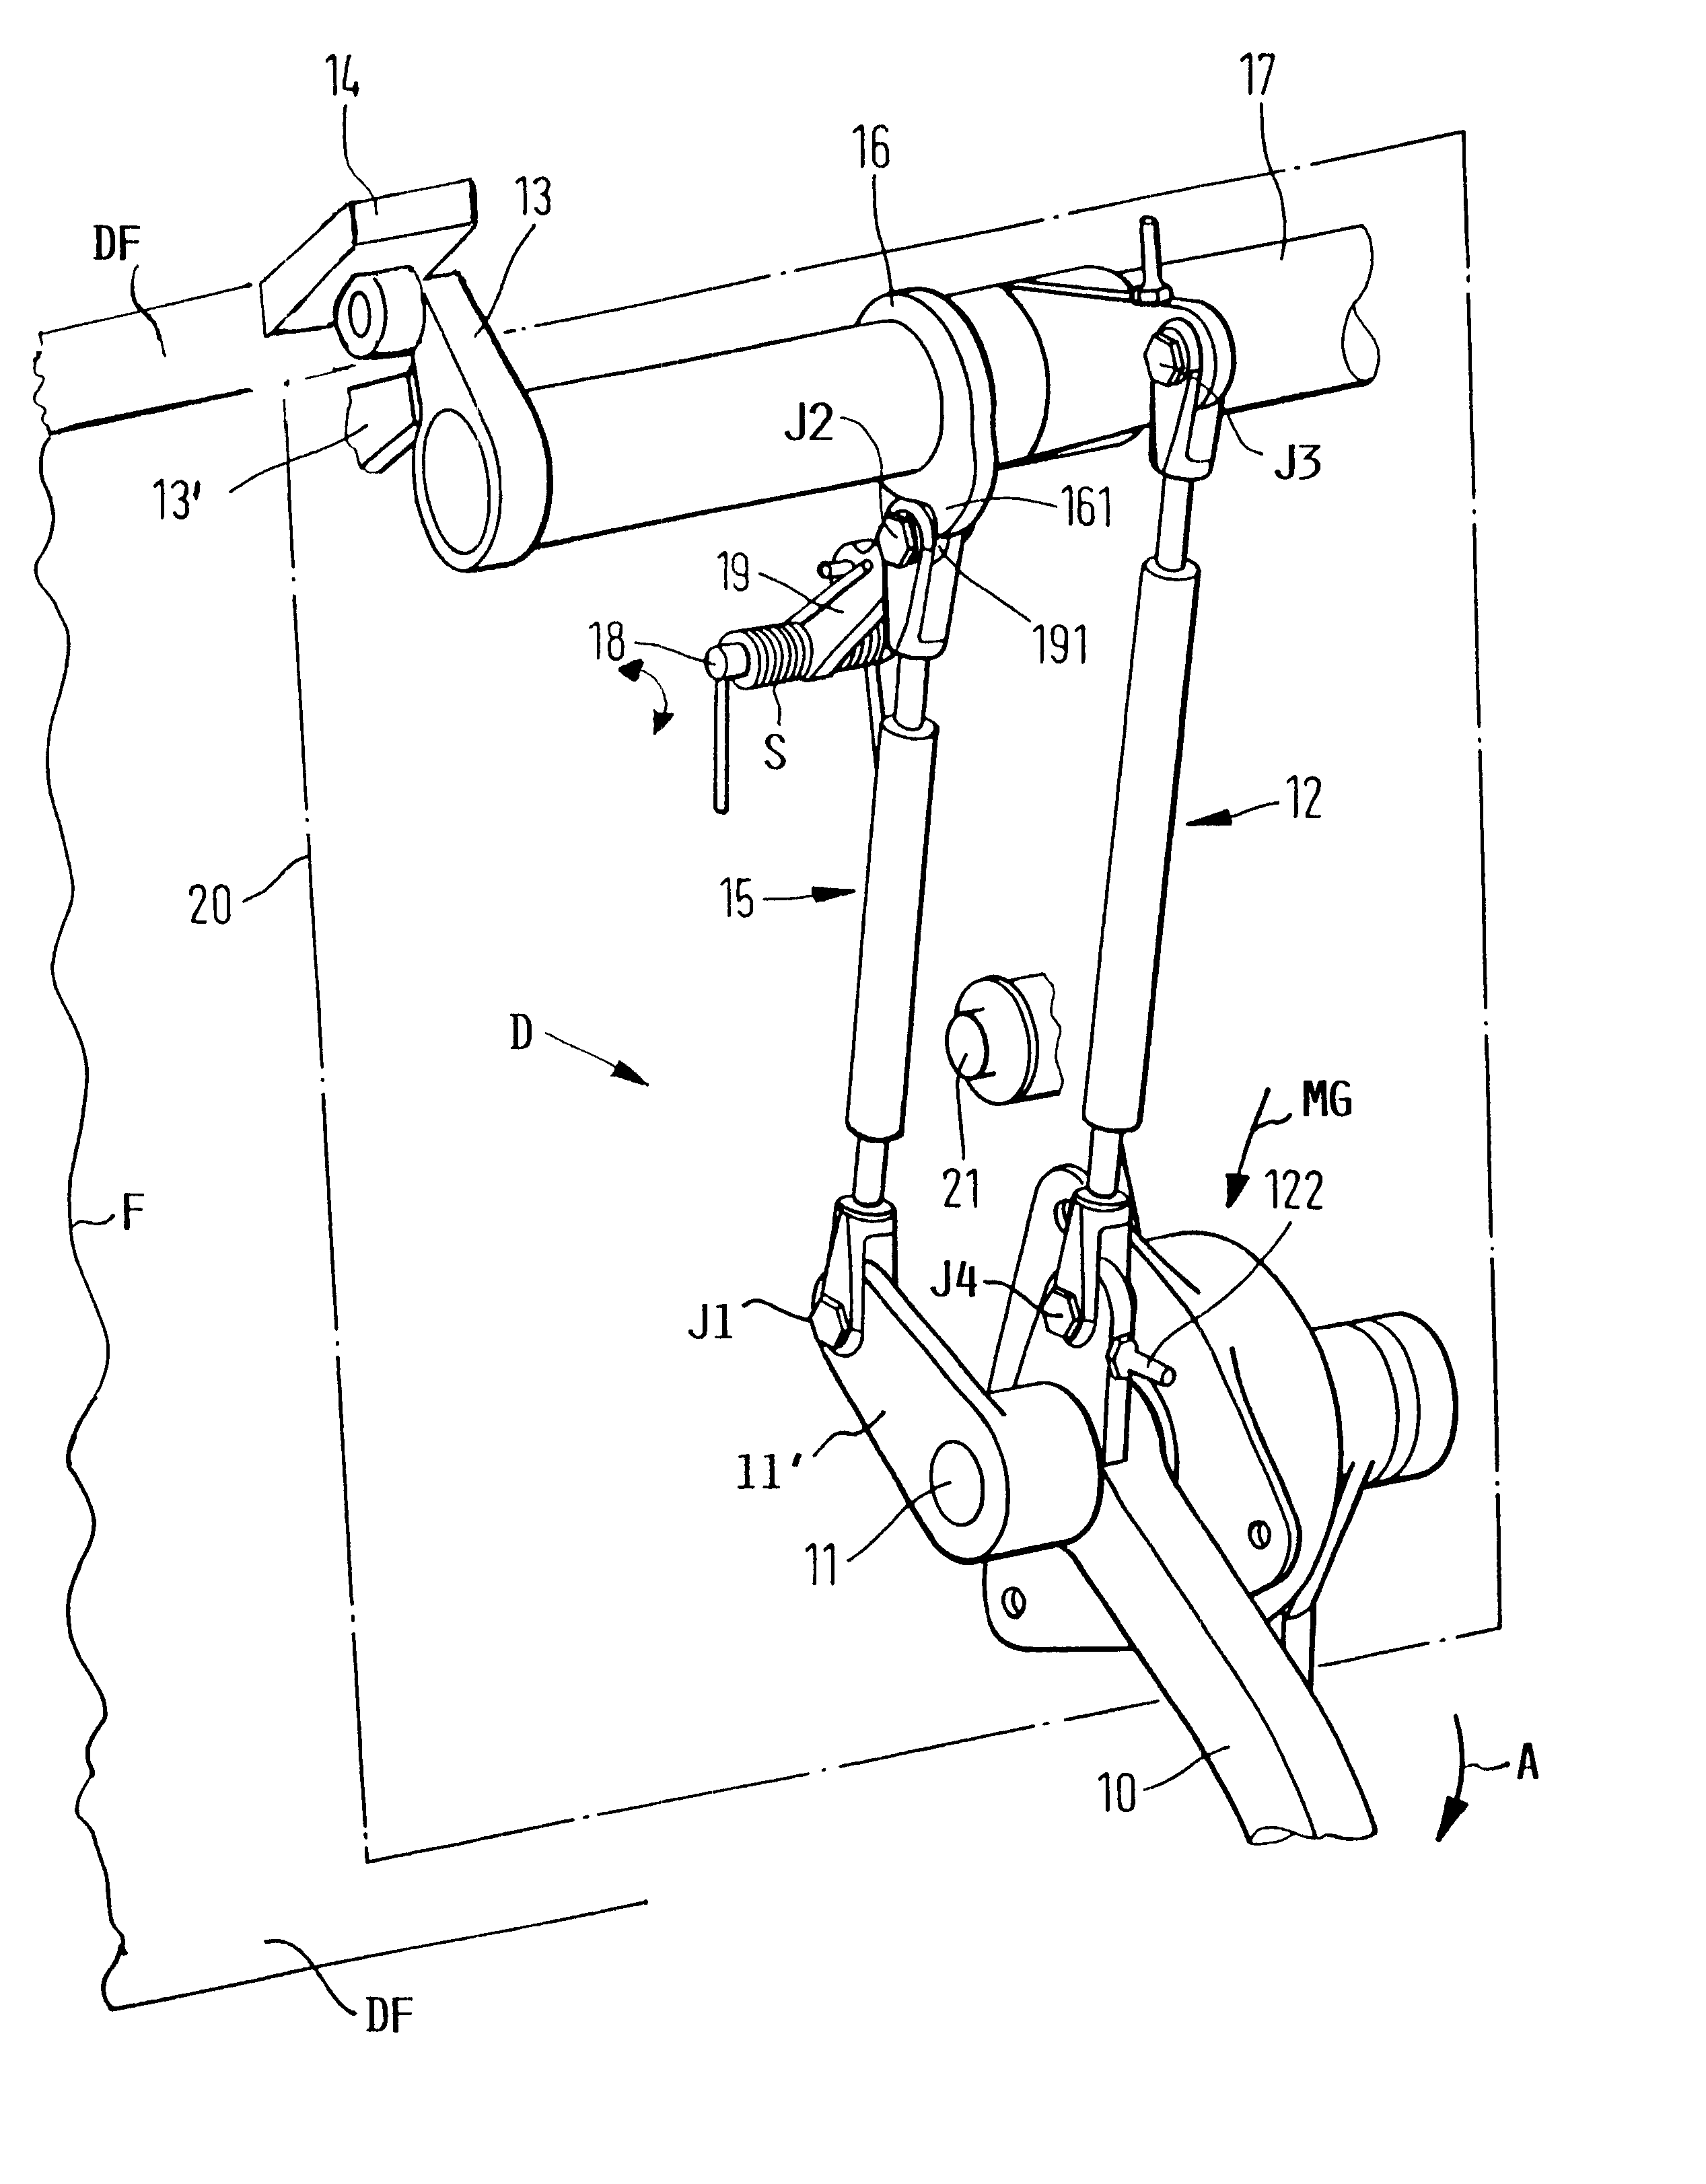 Method and device for closing a door of an aircraft